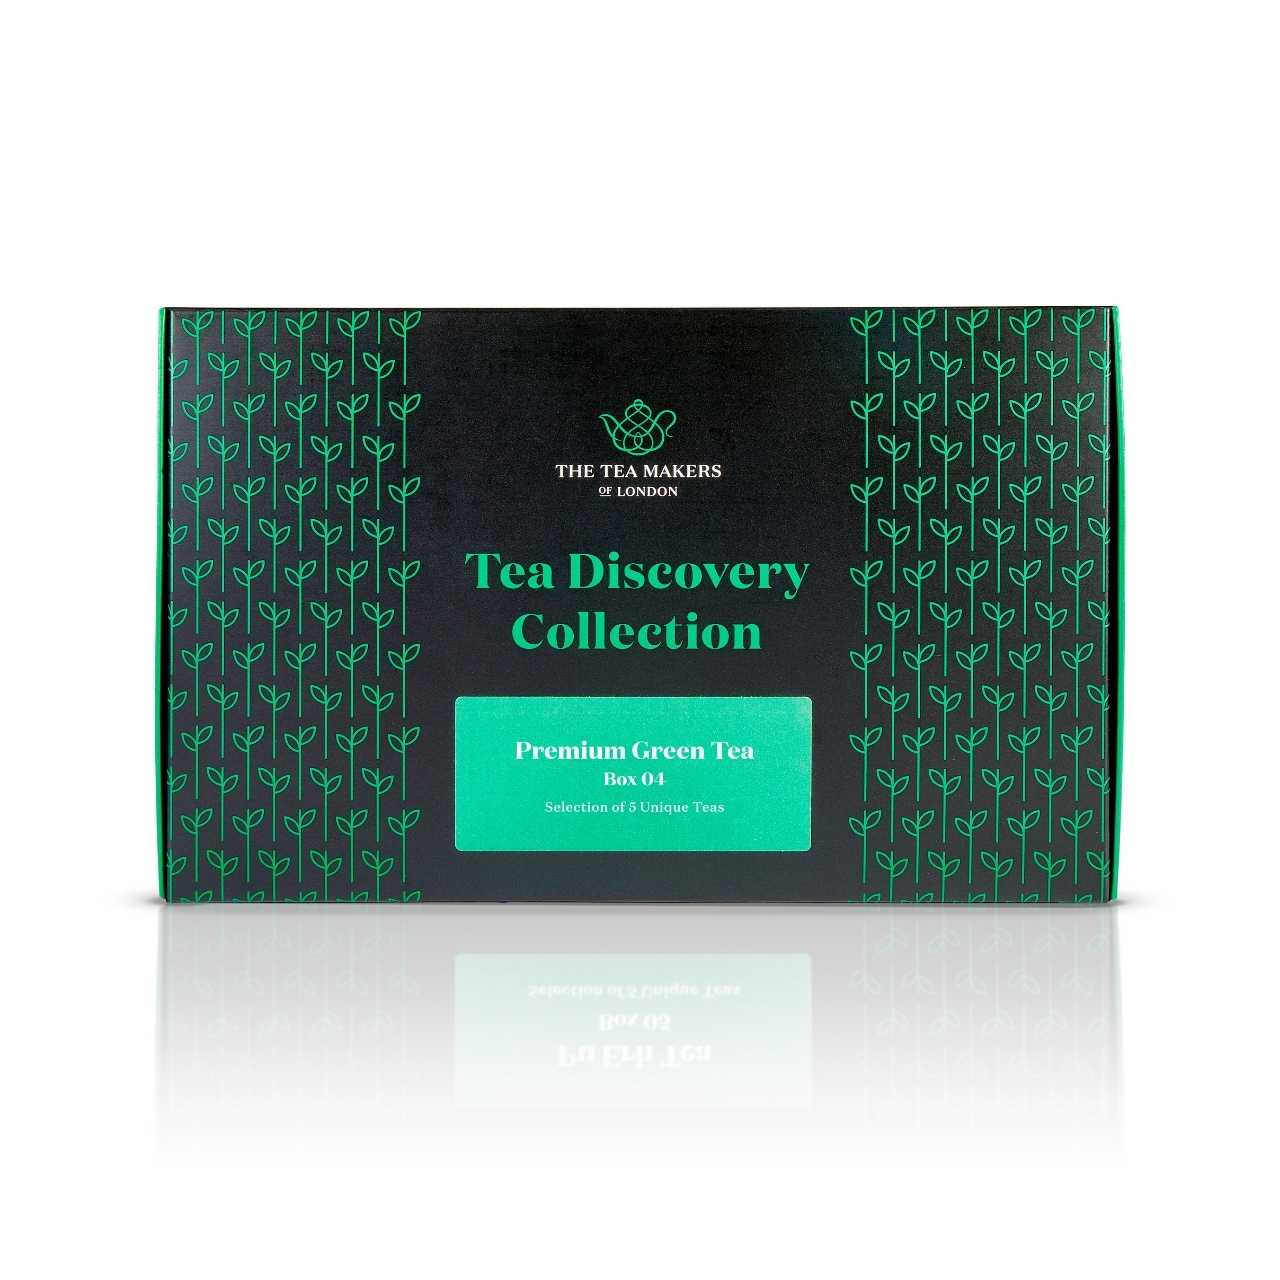 Premium Green Tea Discovery Collection